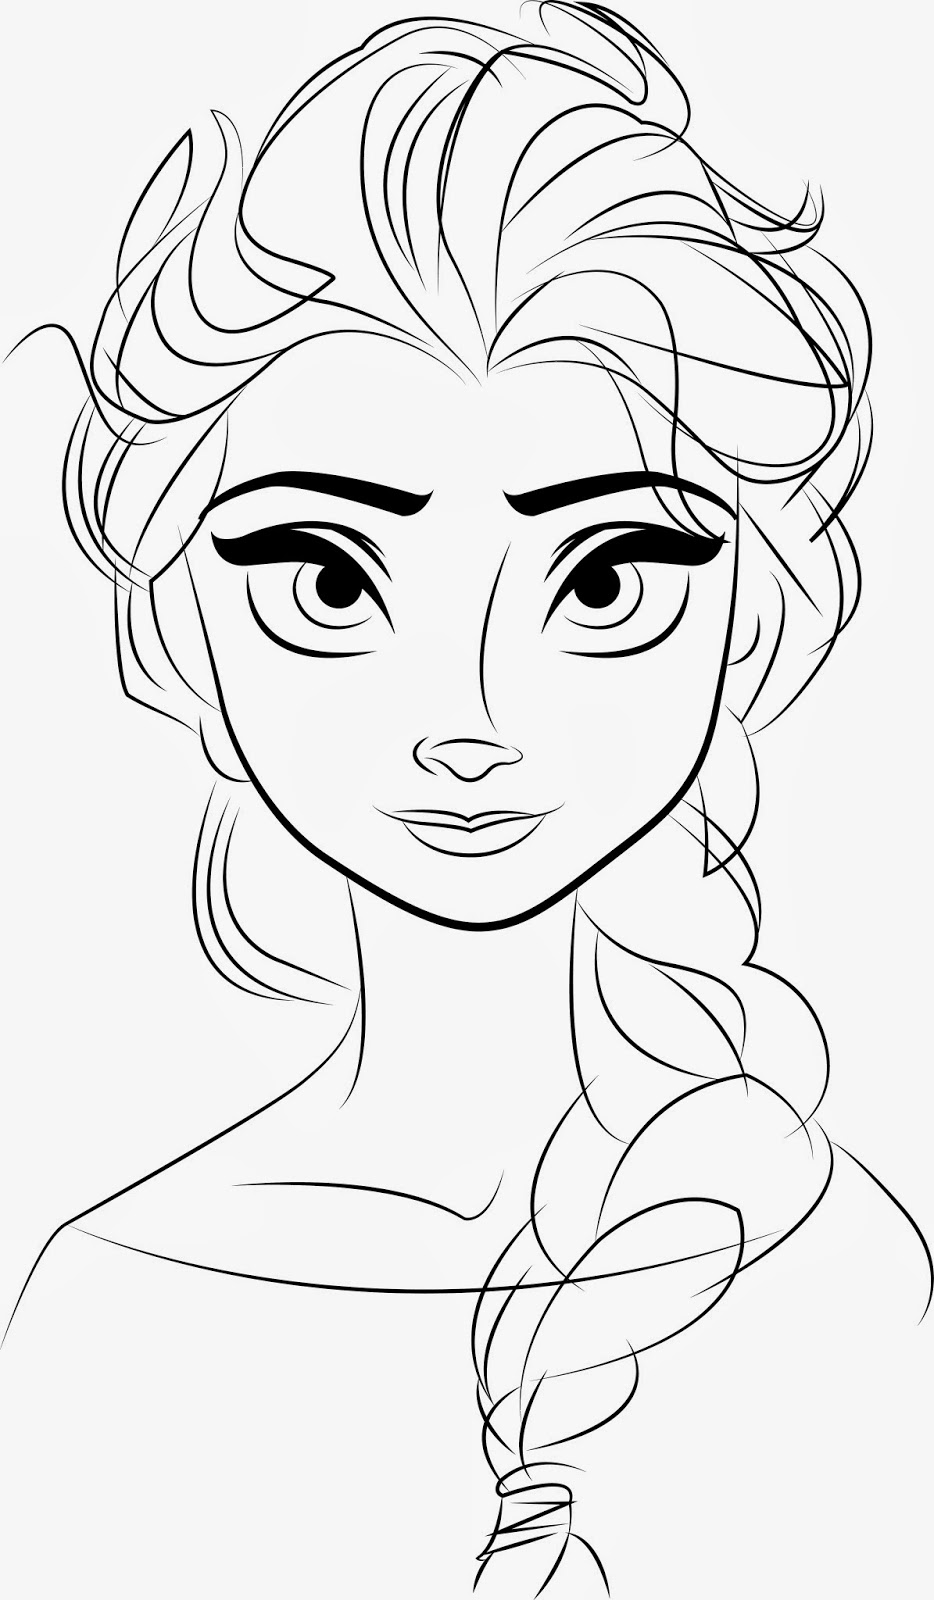 elsa-outline-drawing-elsa-drawing-outline-at-paintingvalley